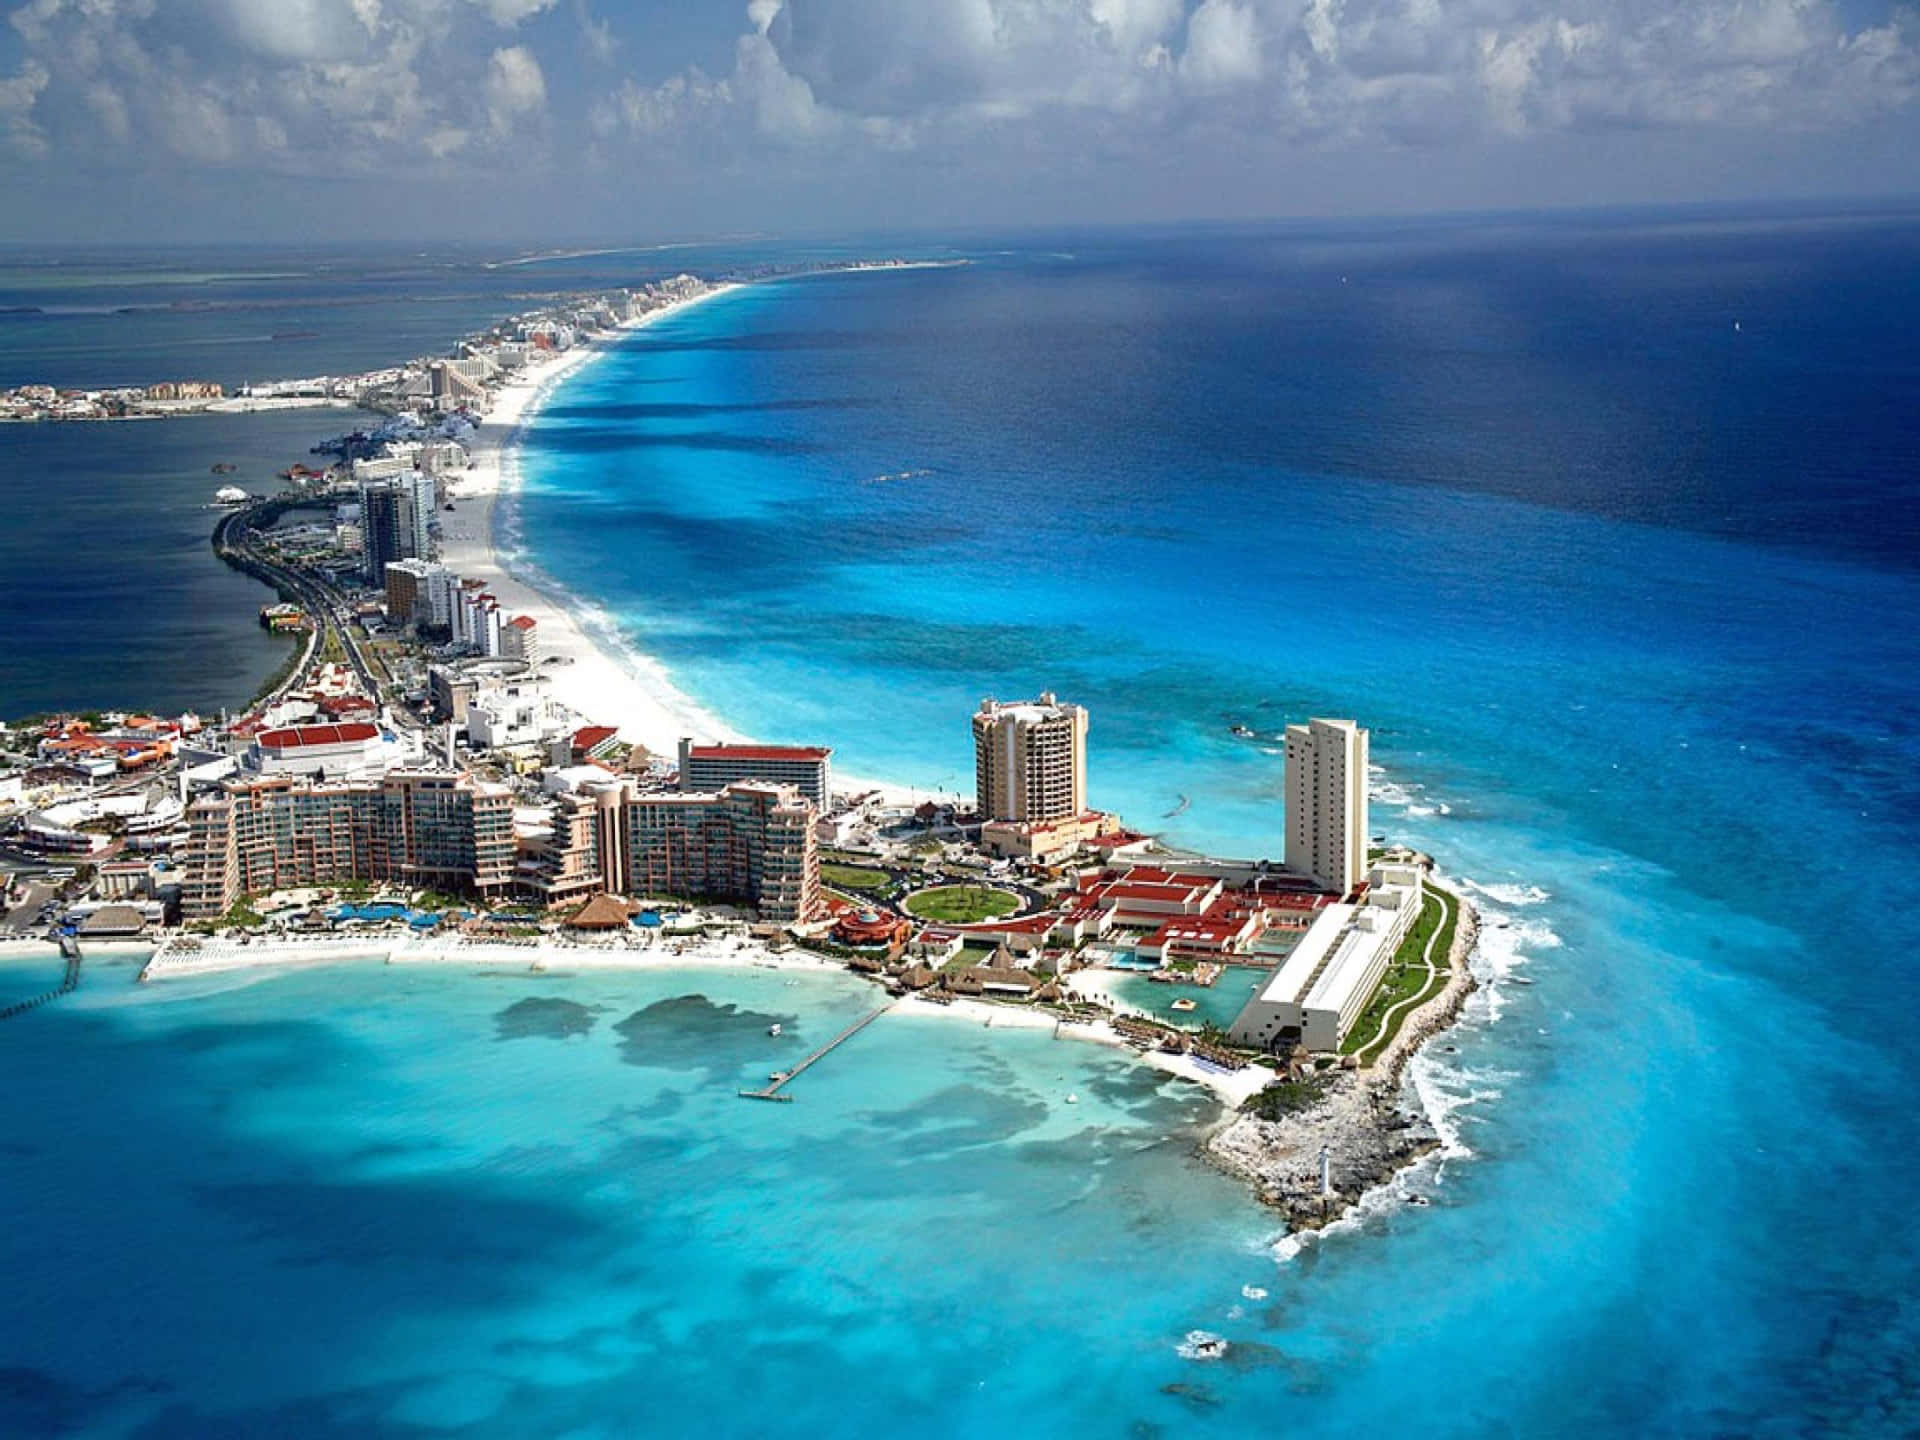 Free Cancun Mexico Wallpaper Downloads, [100+] Cancun Mexico Wallpapers for  FREE 